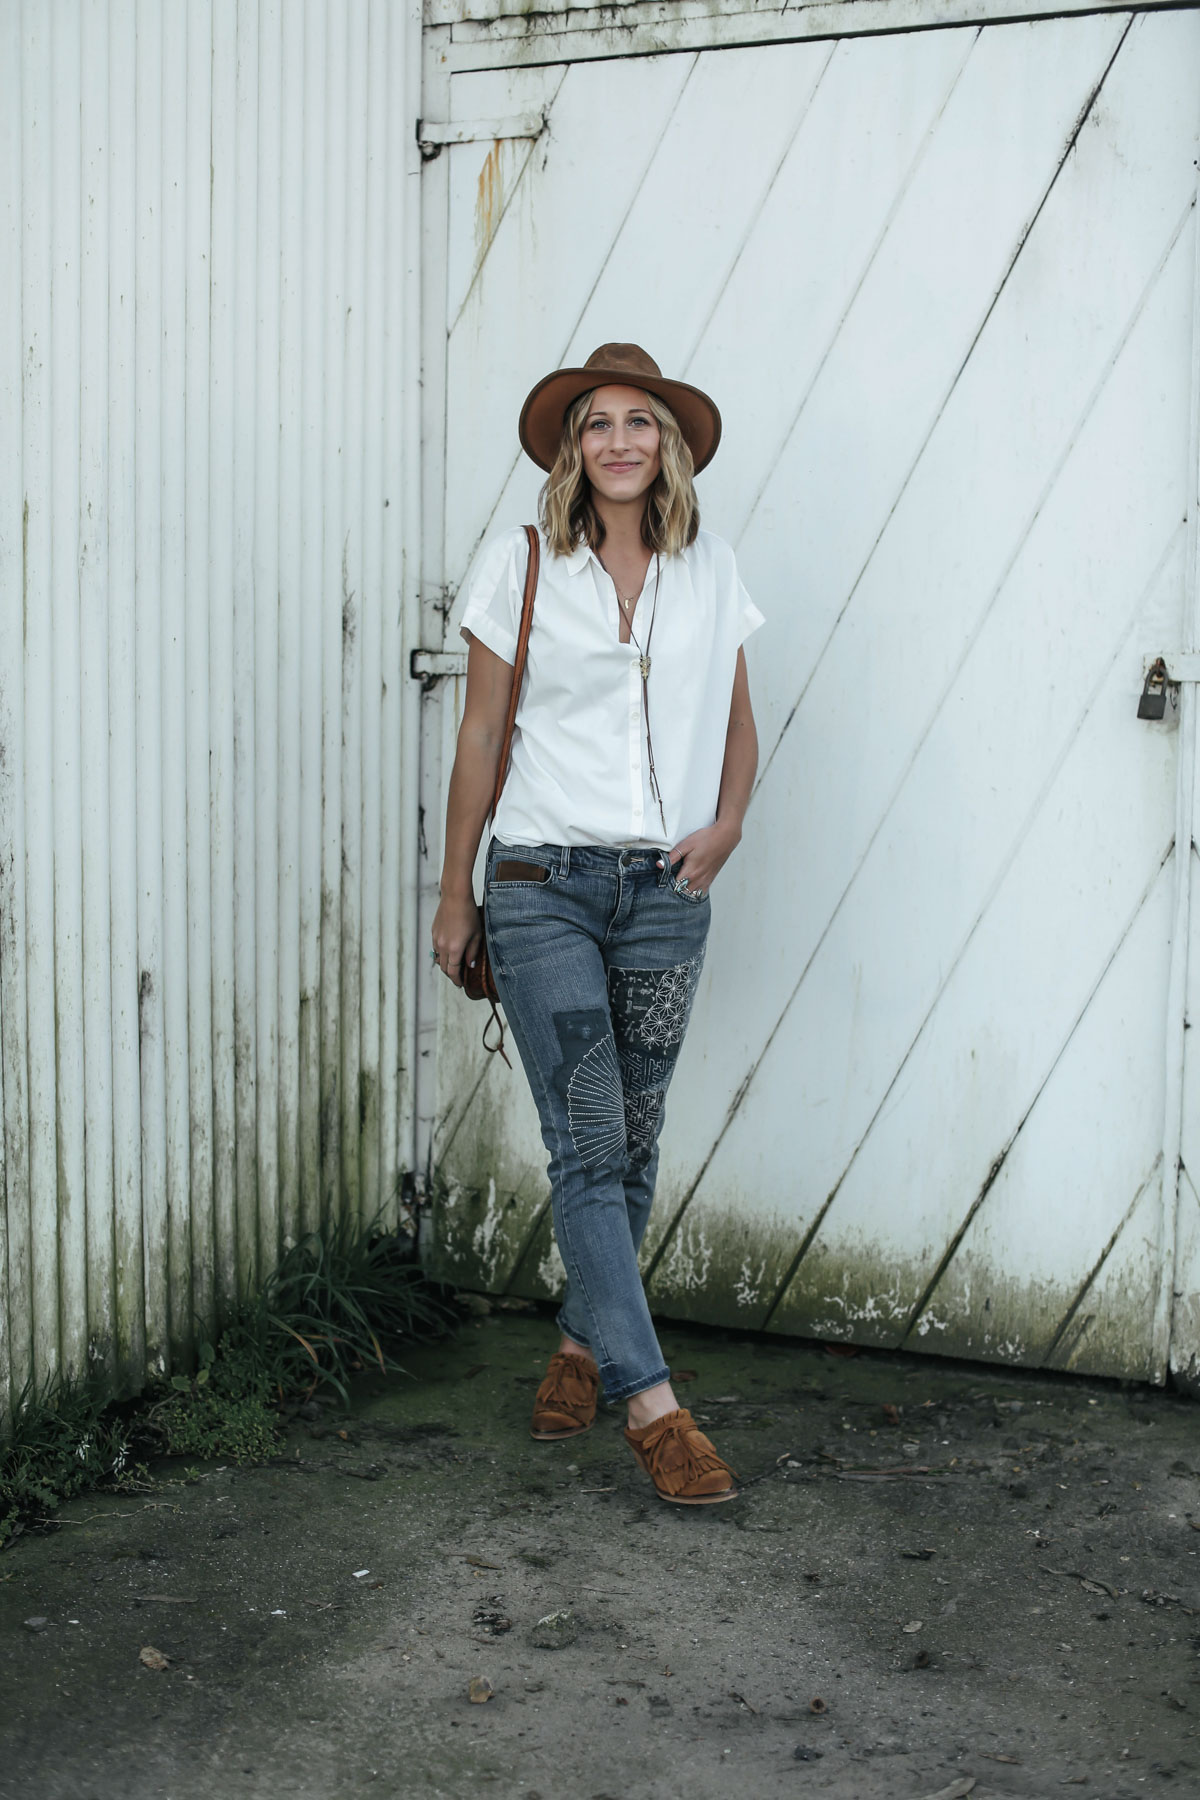 embroidered denim outfit from Anthropologie